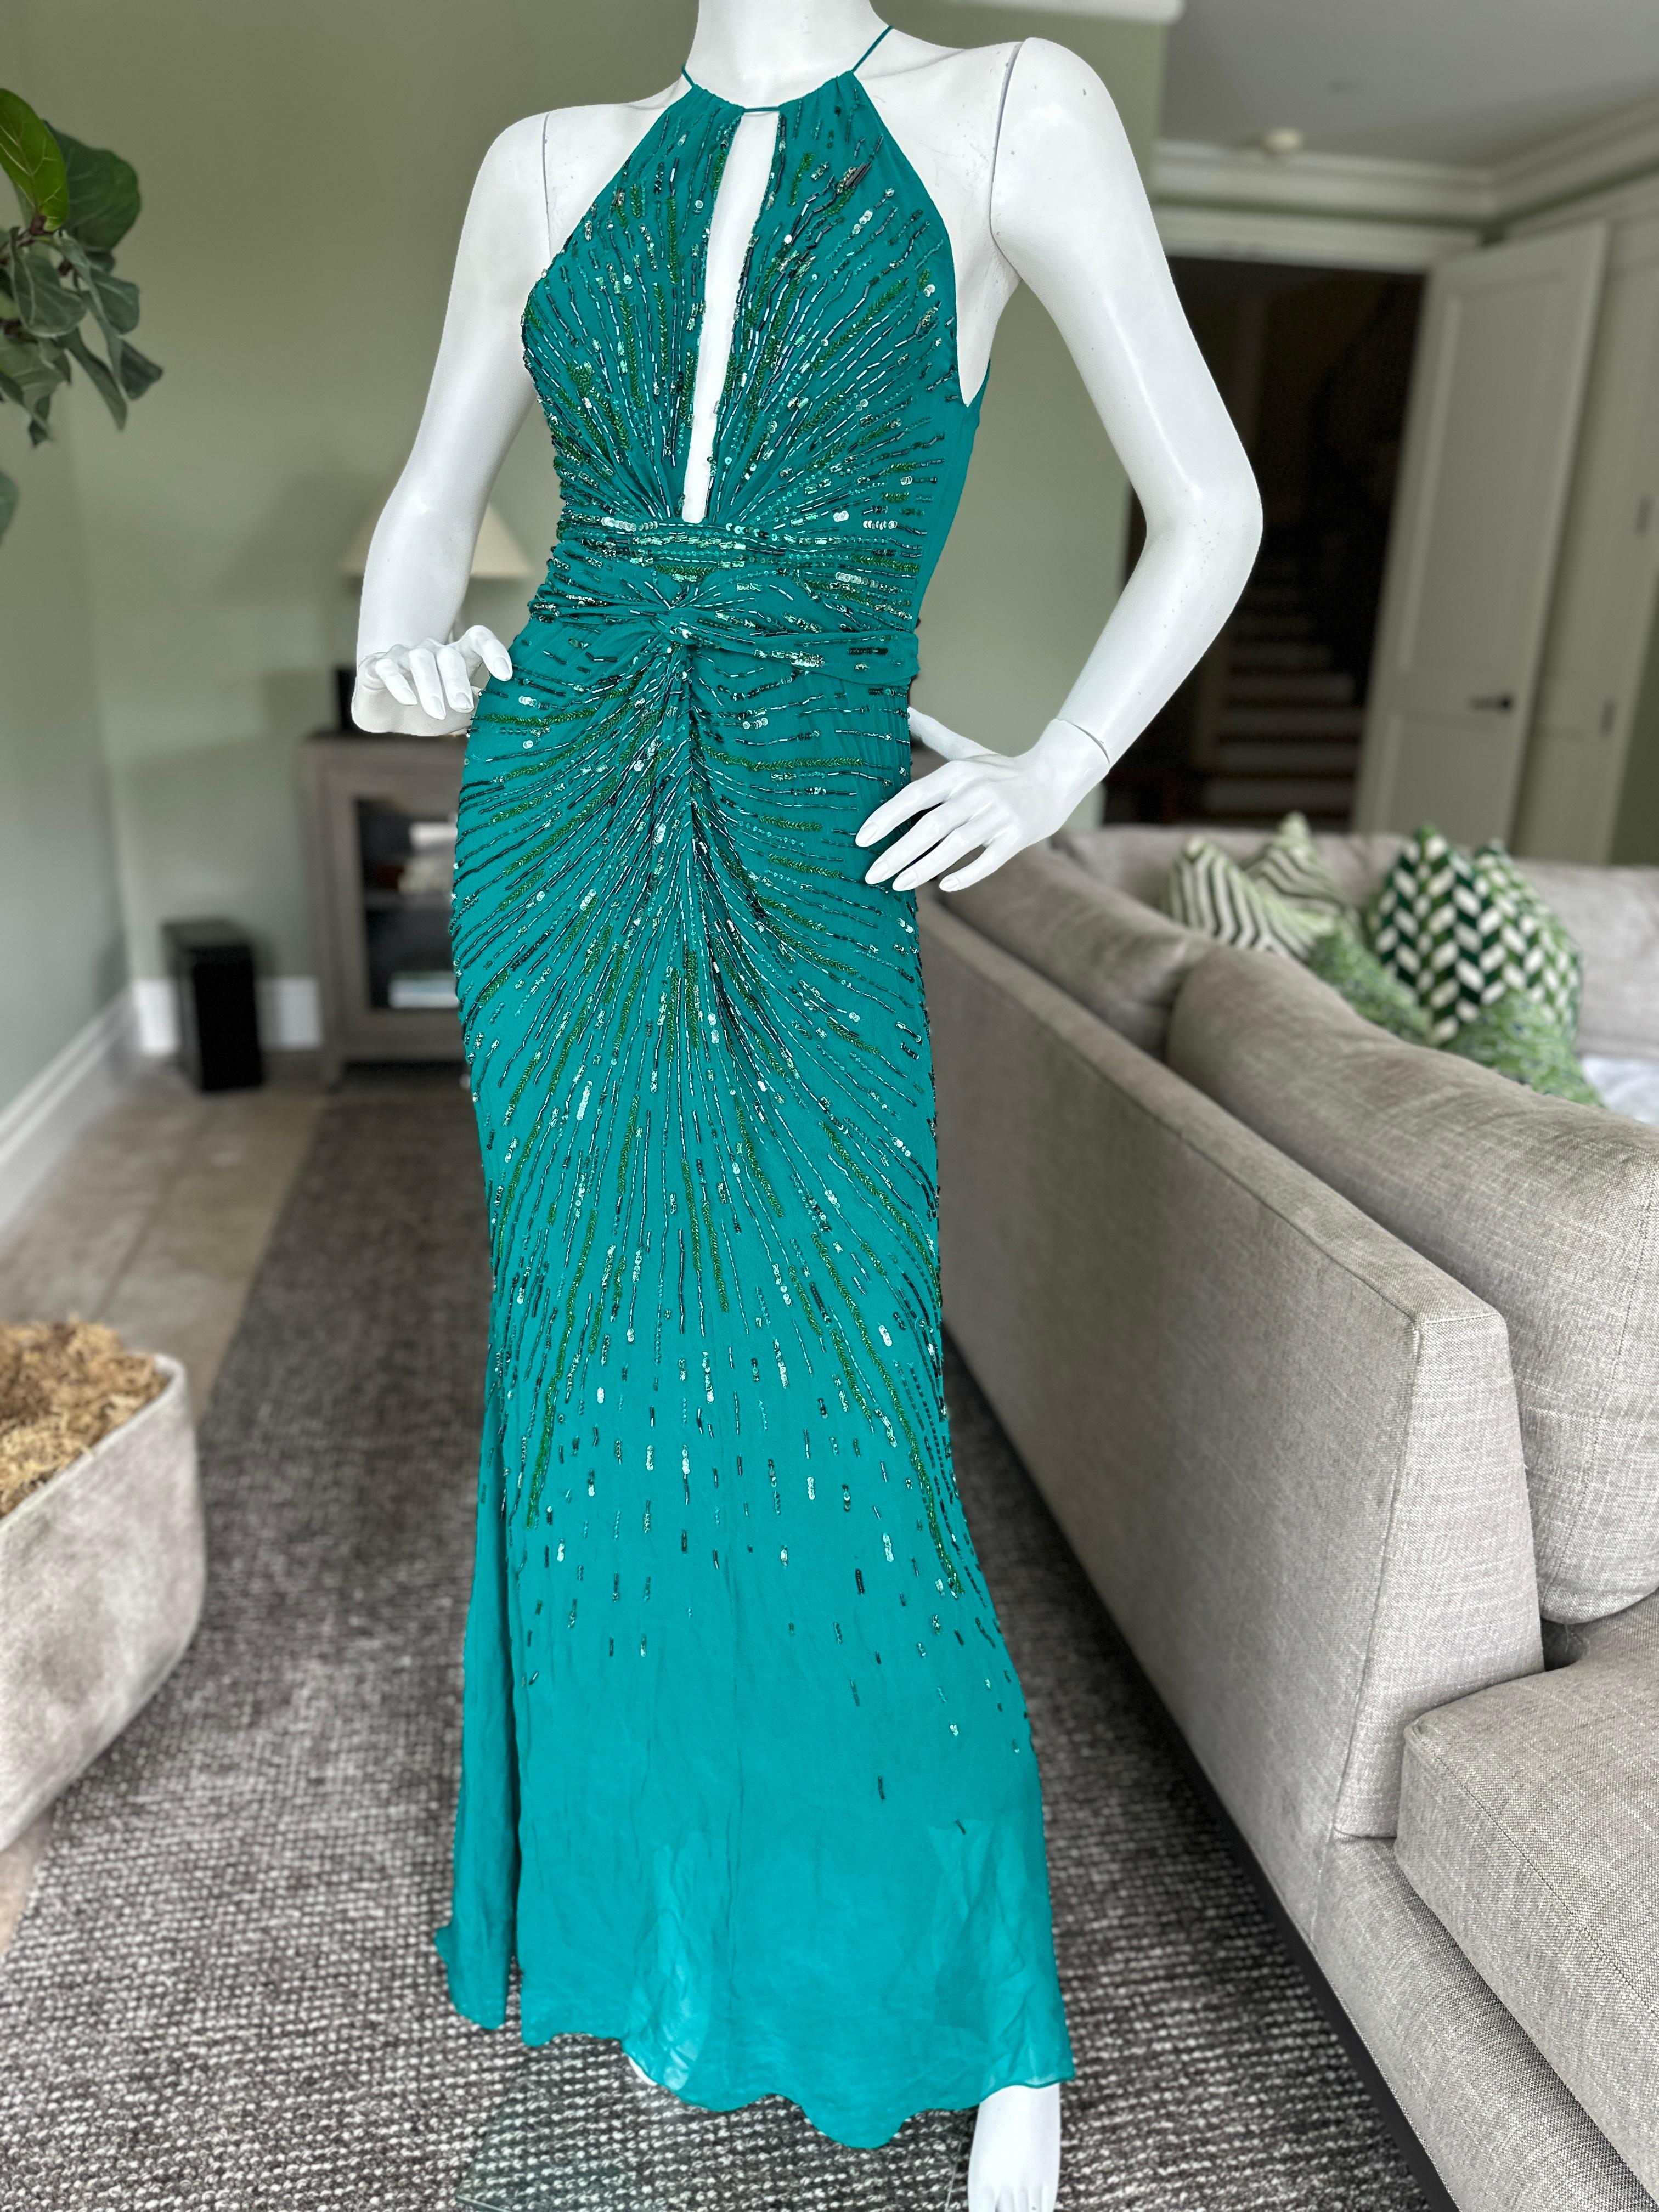 Roberto Cavalli Beaded Green Vintage Evening Dress with Fishtail Back In Good Condition For Sale In Cloverdale, CA